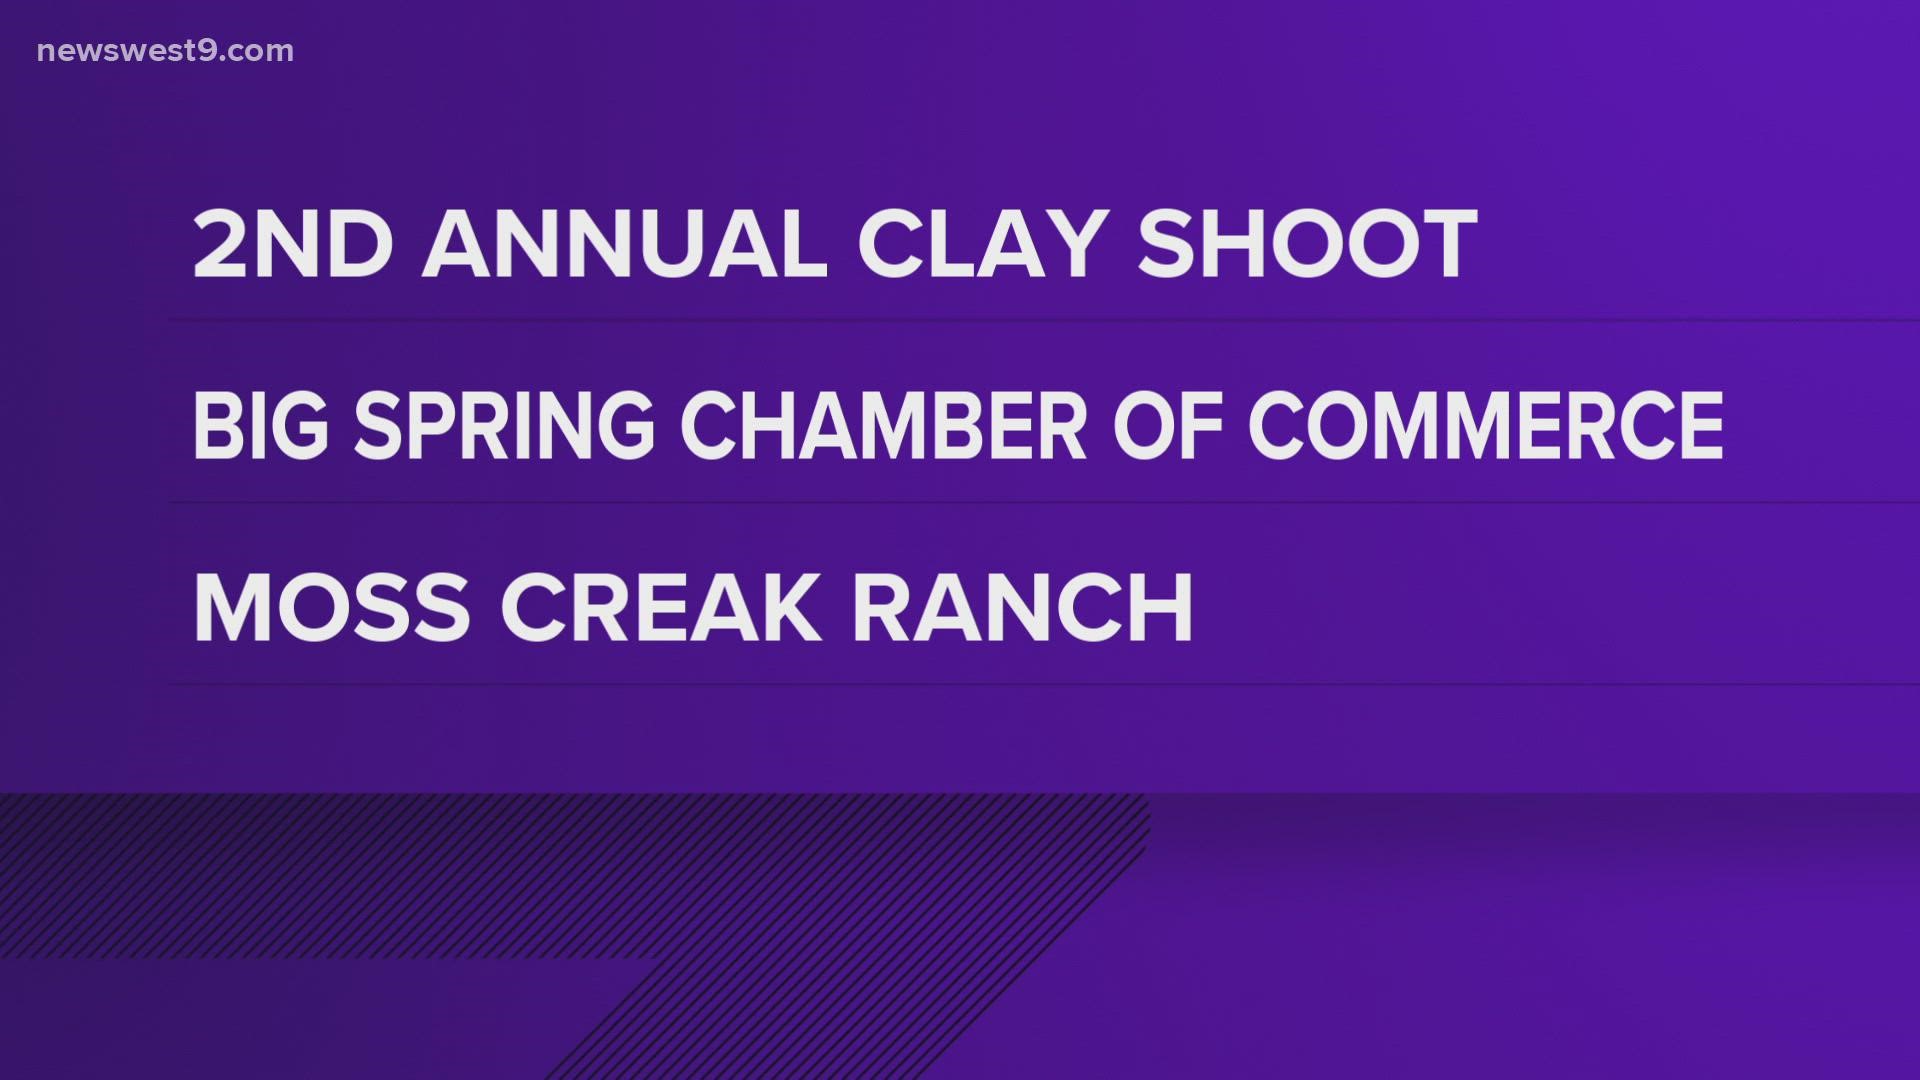 This is the second year that the Big Spring Area Chamber of Commerce has held the event.